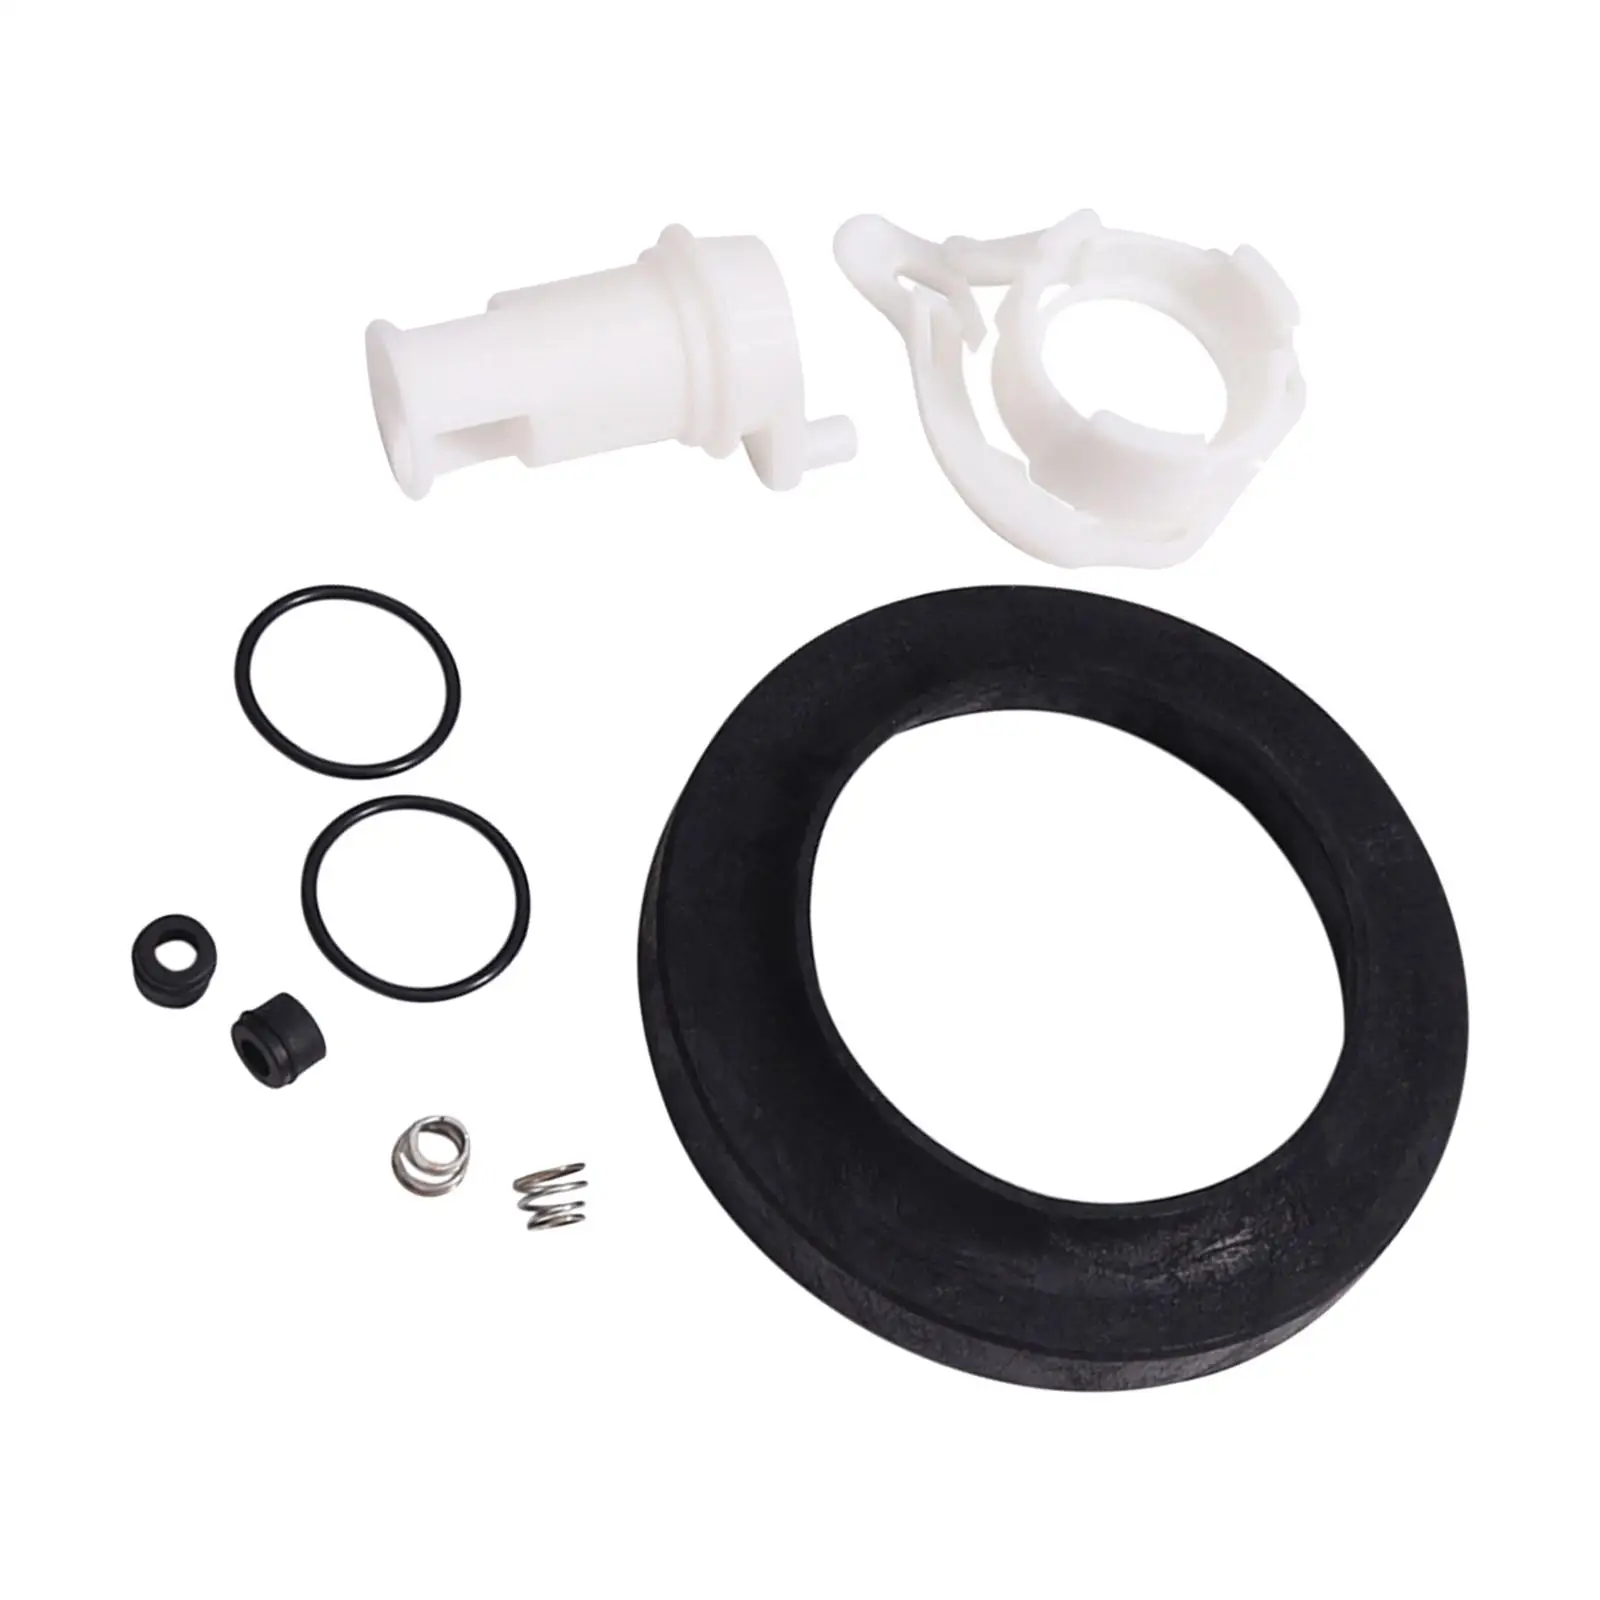 42049 Toilet Water Valve Set Easy to Install Compatible Practical Durable with Seal for Accessory Parts